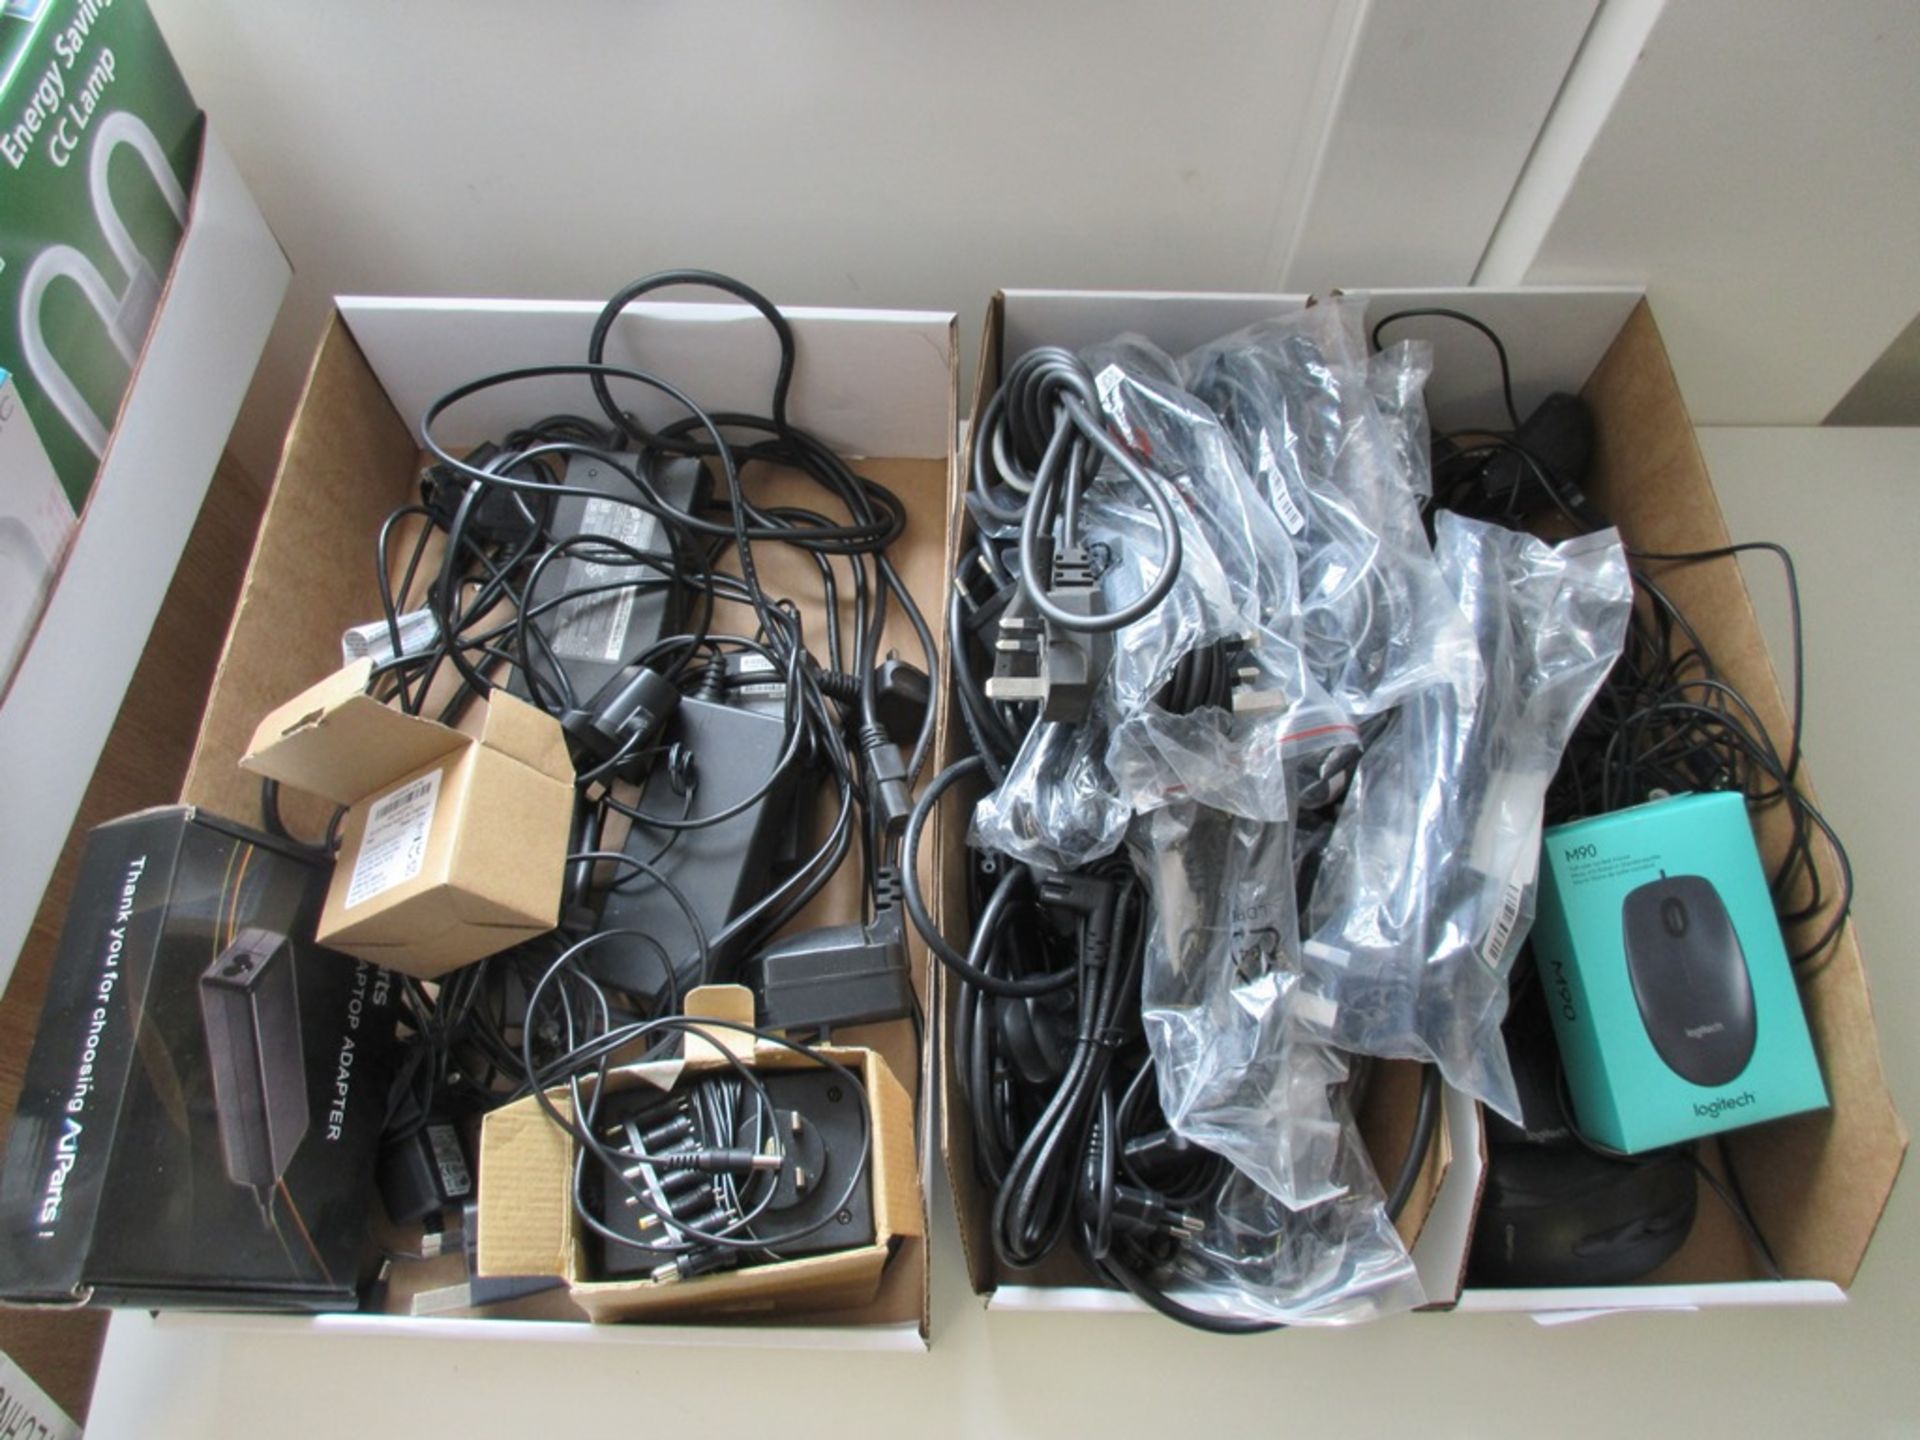 Assorted computer spares including leads, mice, laptop adaptors, etc. - Image 2 of 3